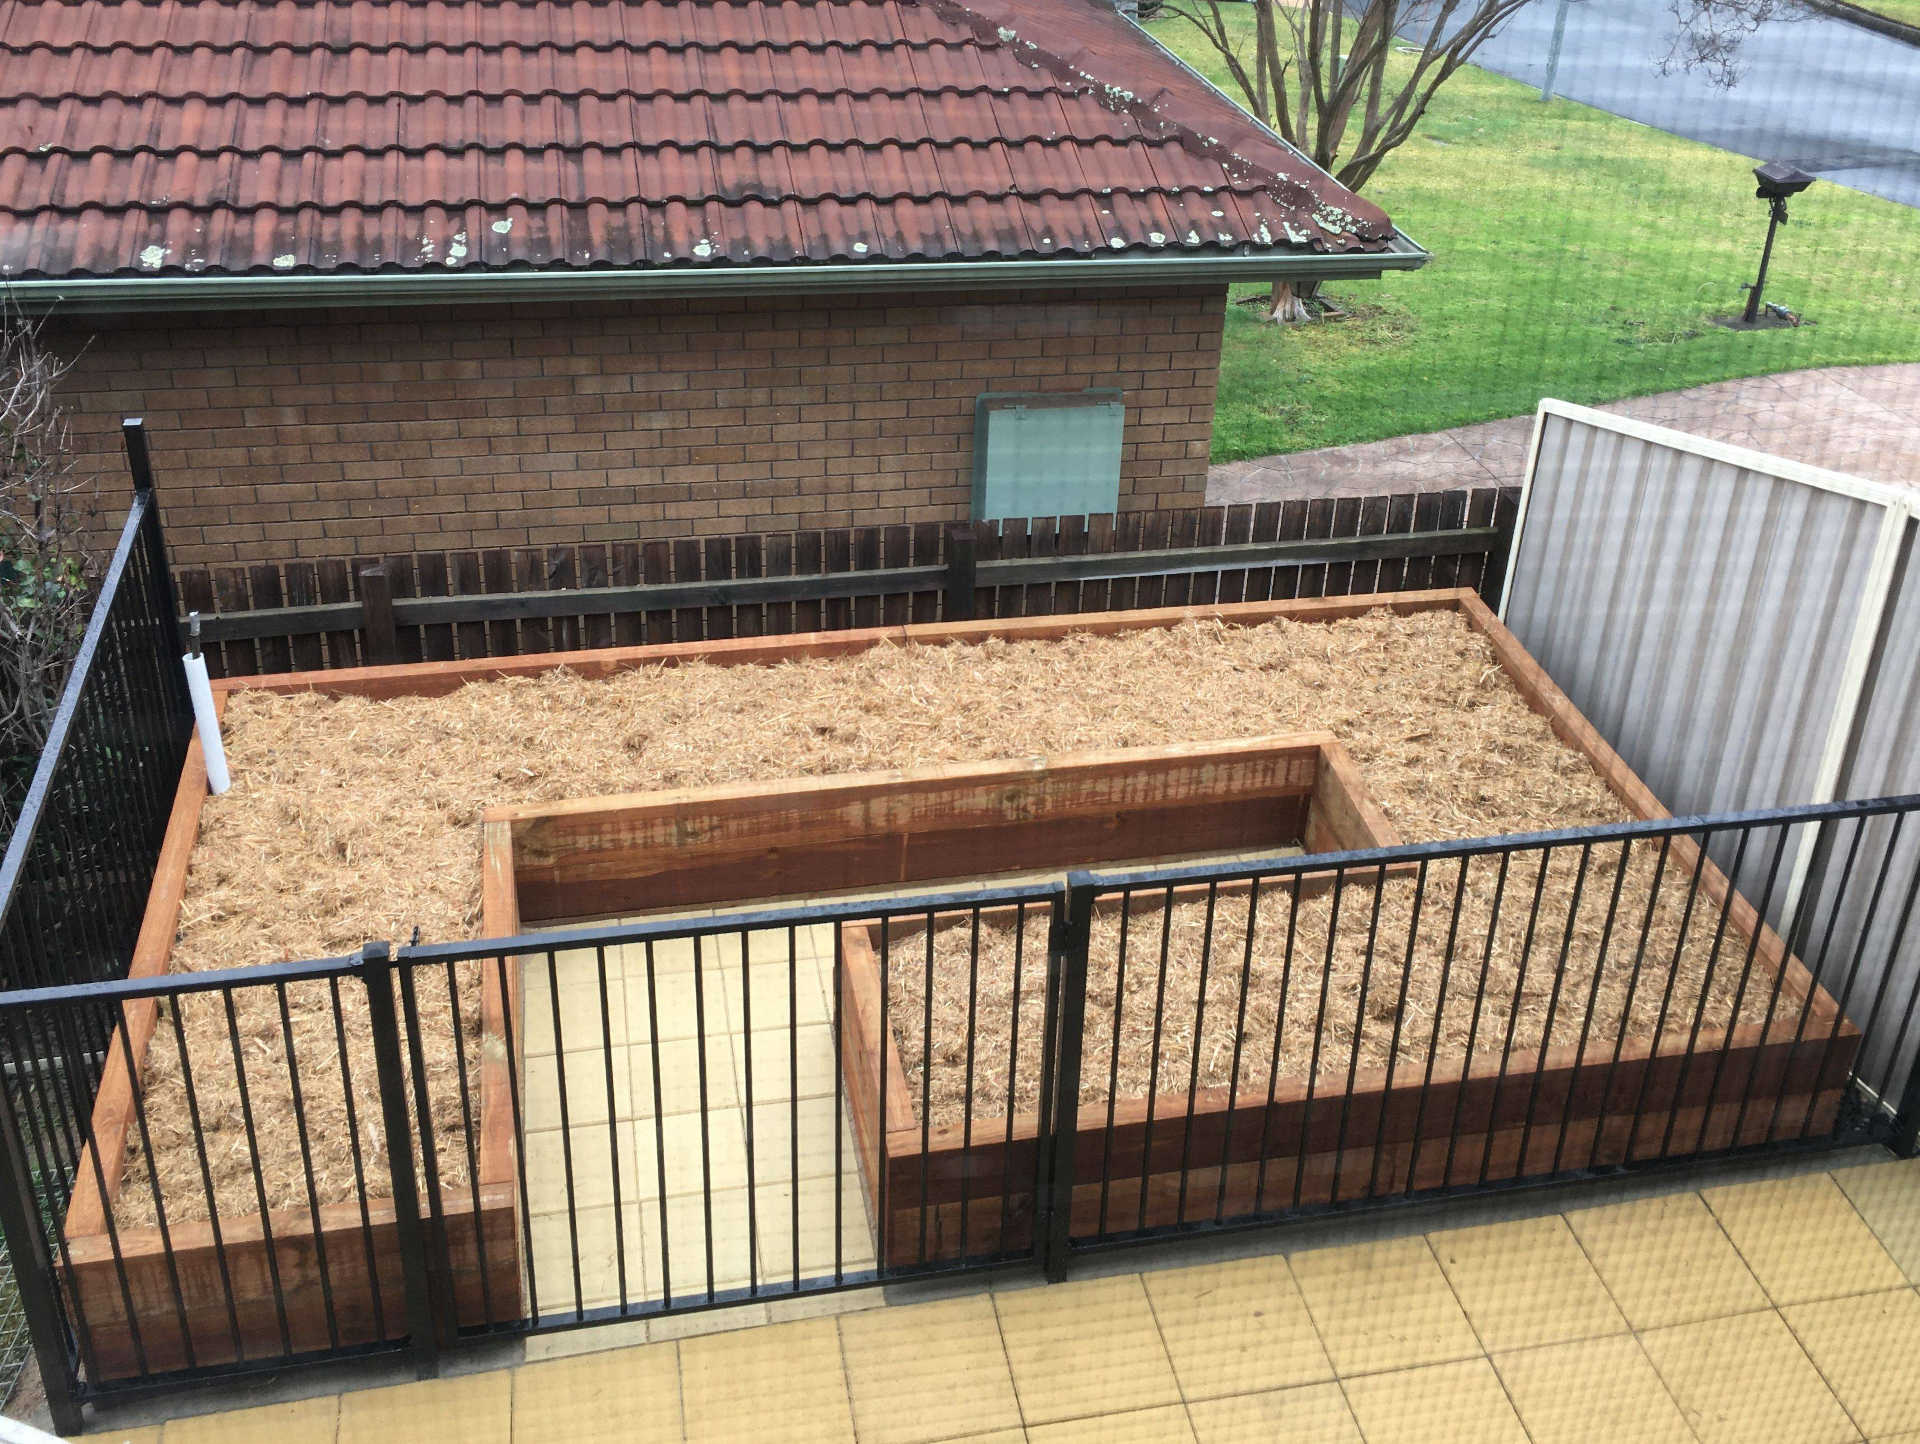 Treated Pine Raised Vegetable Garden with paving filled with Compost and Mushroom Compost Sugar Cane Mulch Figtree Wollongong NSW